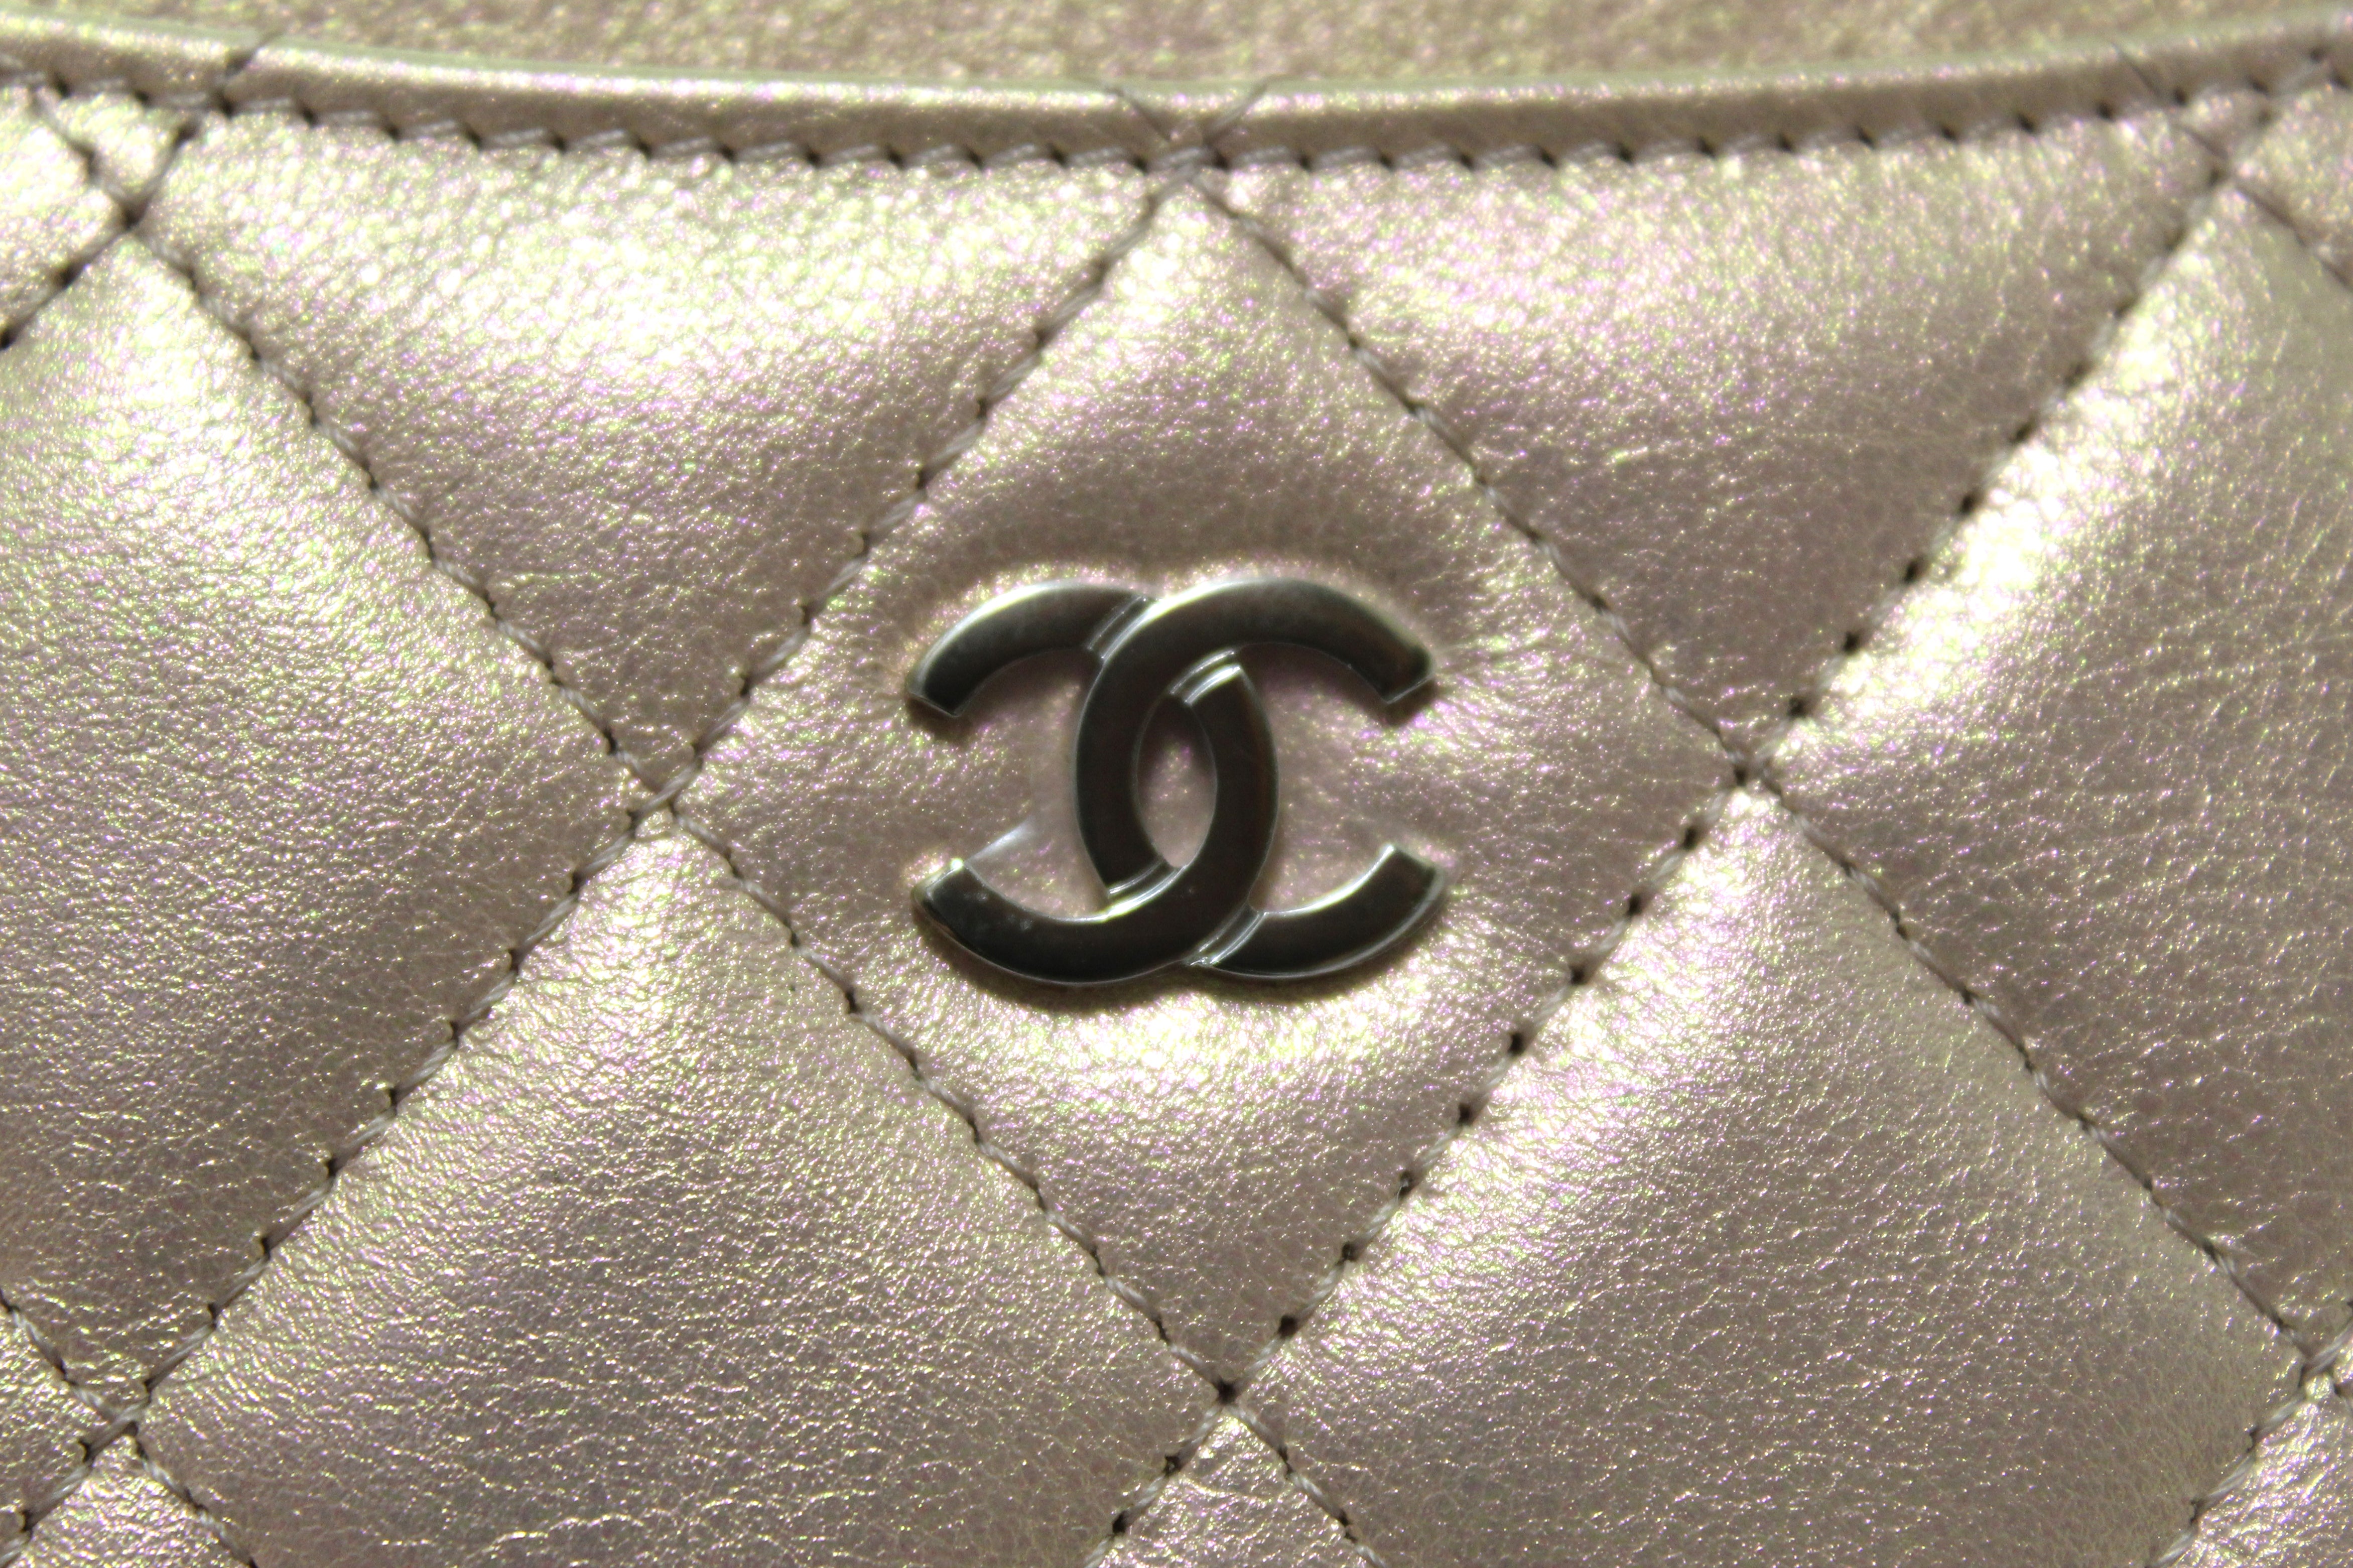 Authentic NEW Chanel Iridescent Light Pink Quilted Lambskin Leather Card Holder